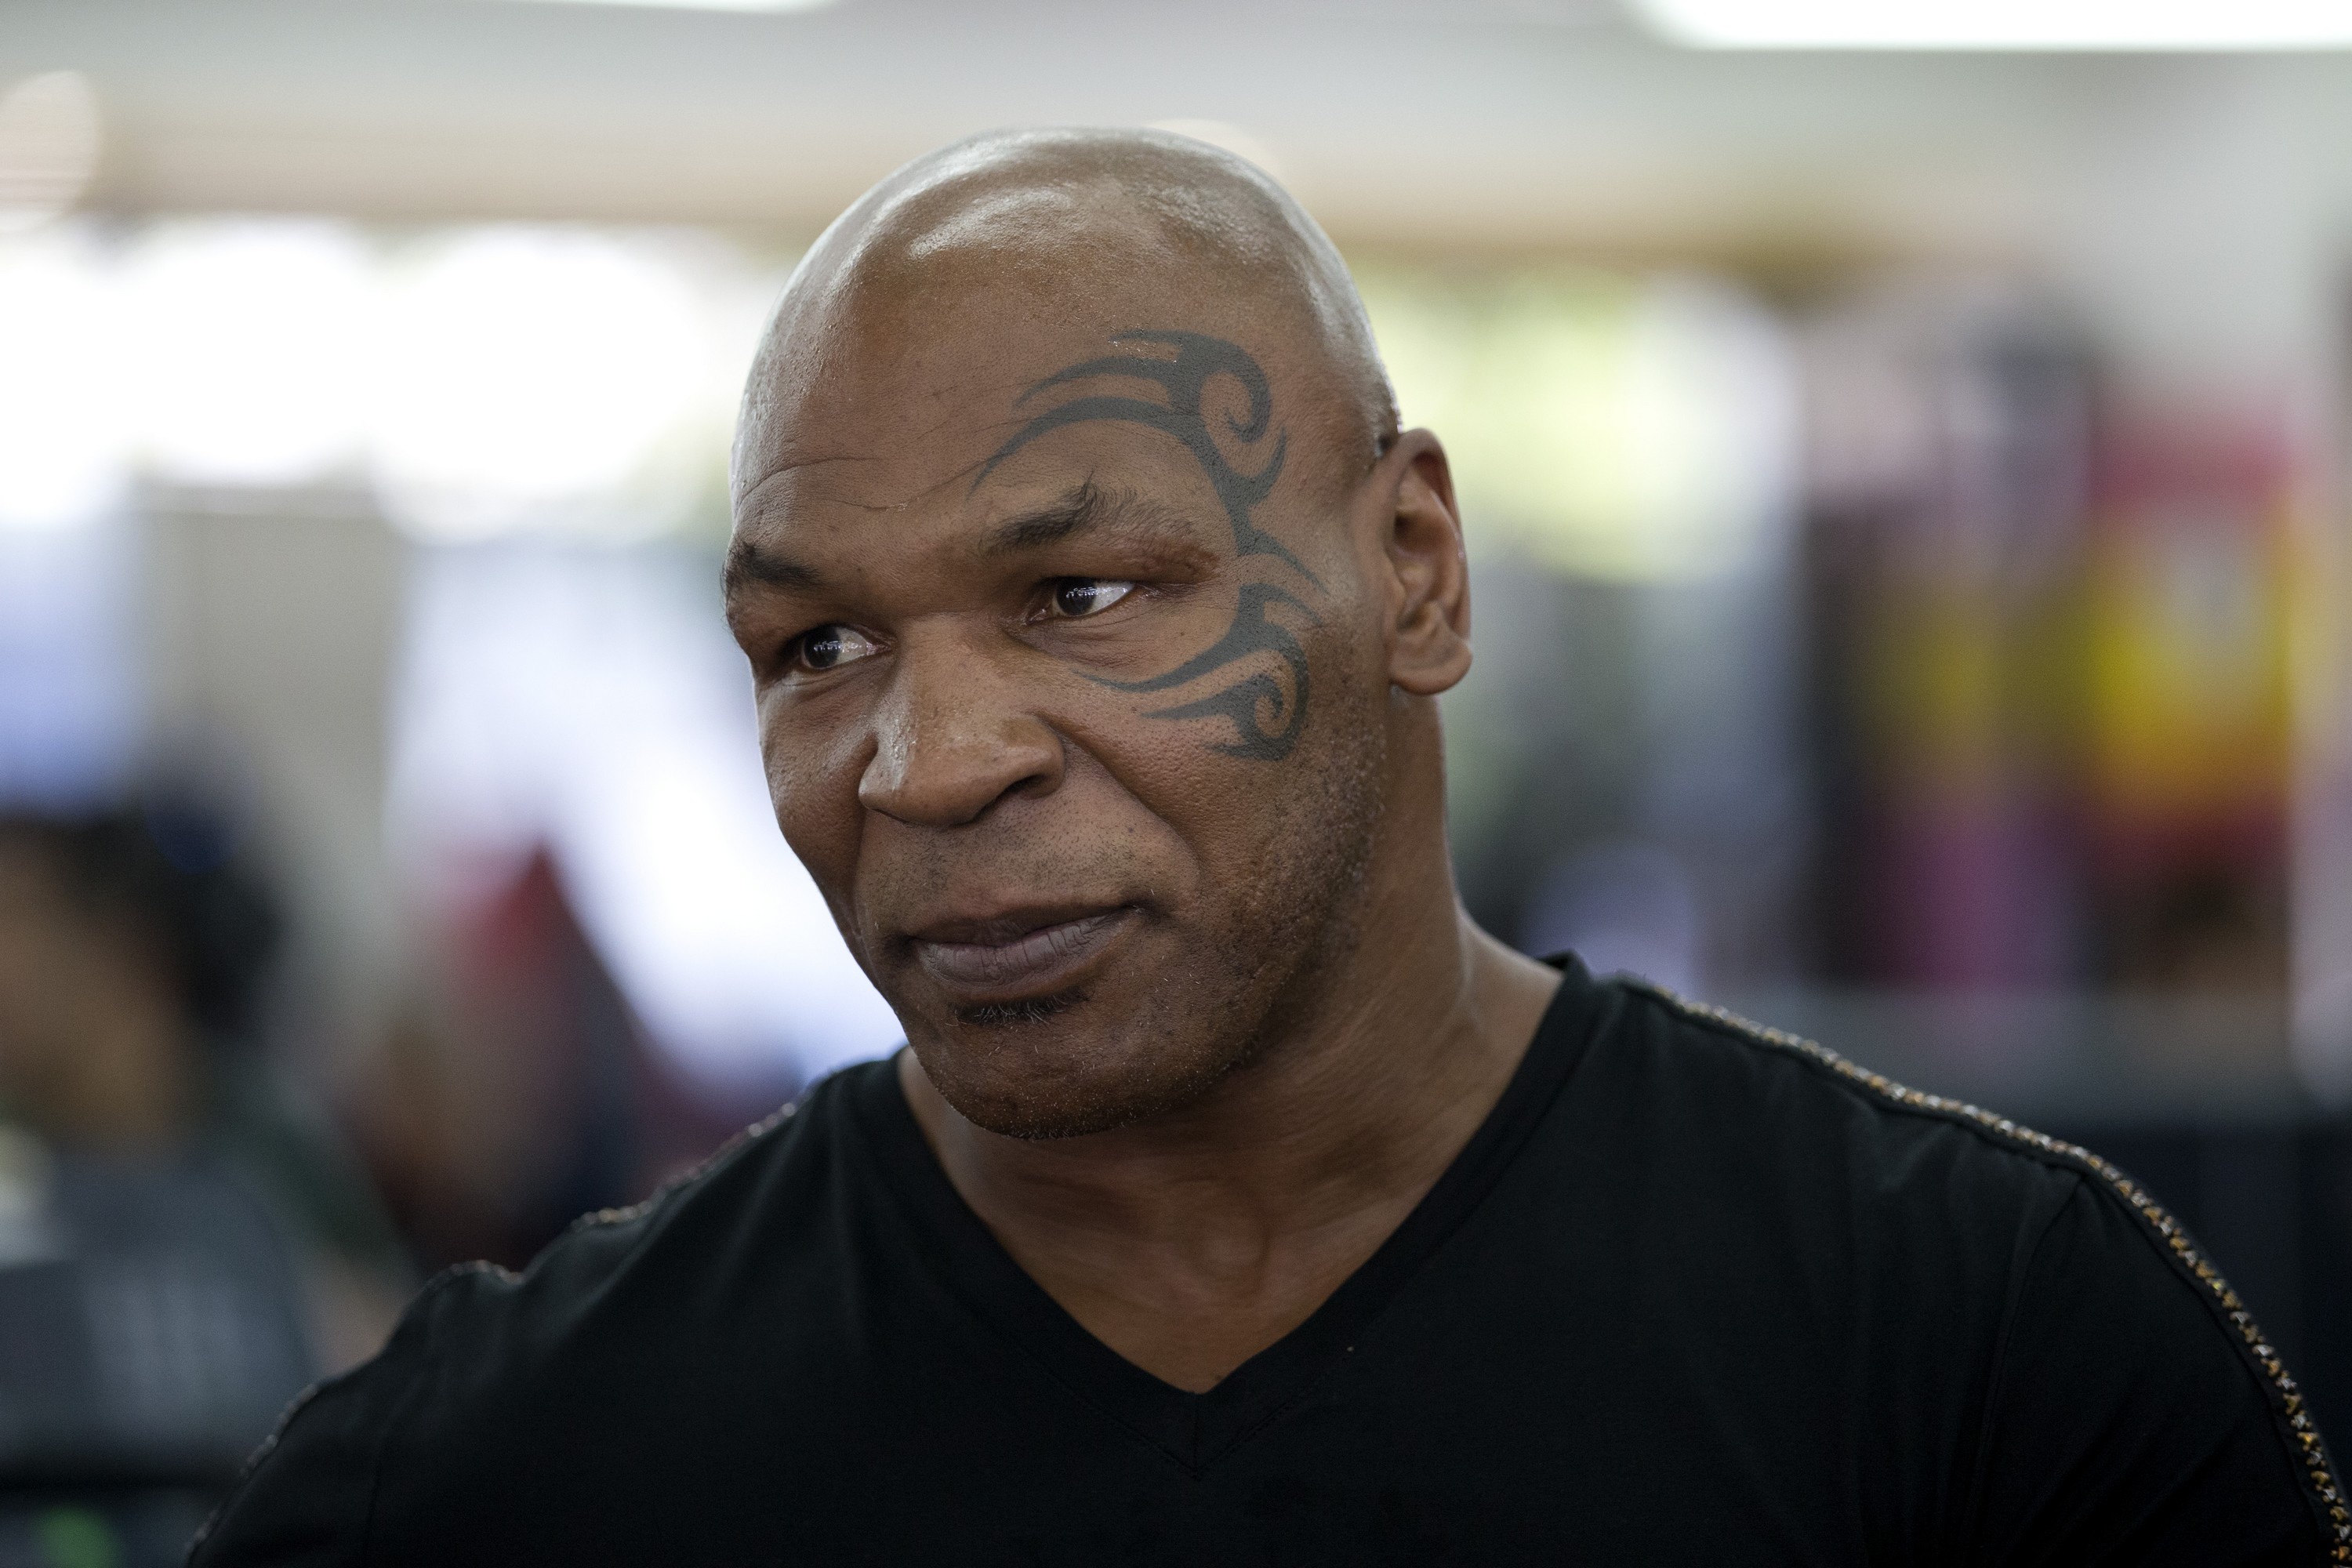 mike tyson, celebrity, actor, american, boxer, tattoo